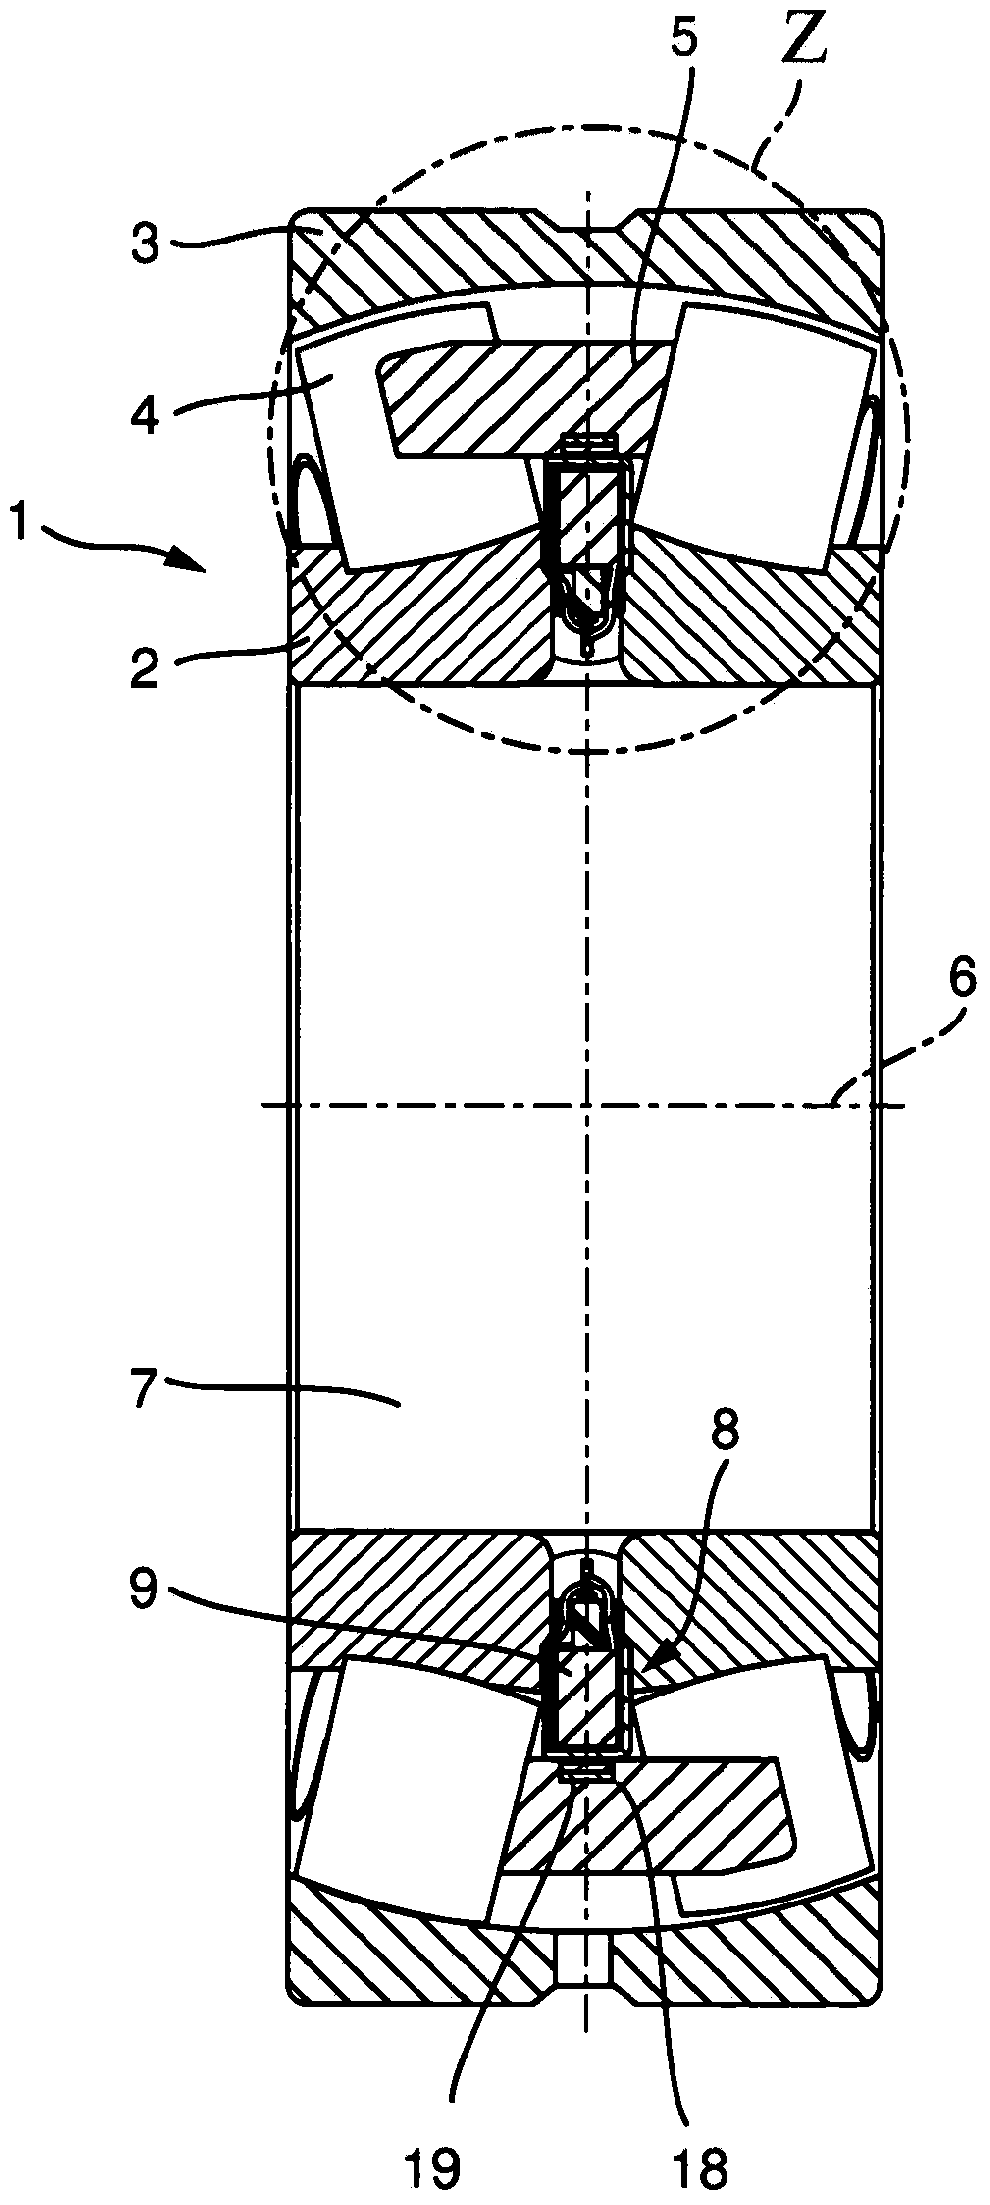 Anti-friction bearing, in particular two-row anti-friction bearing, having a power generation unit, in particular for mounting a roller